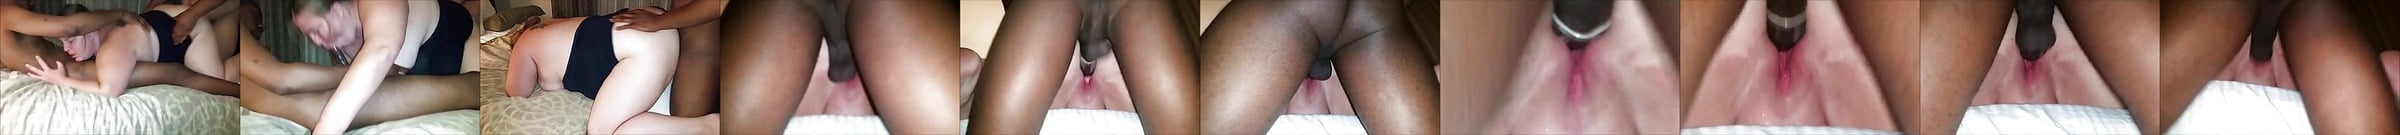 Two Bbws Share A Bhm And Each Other Free Porn 23 XHamster XHamster